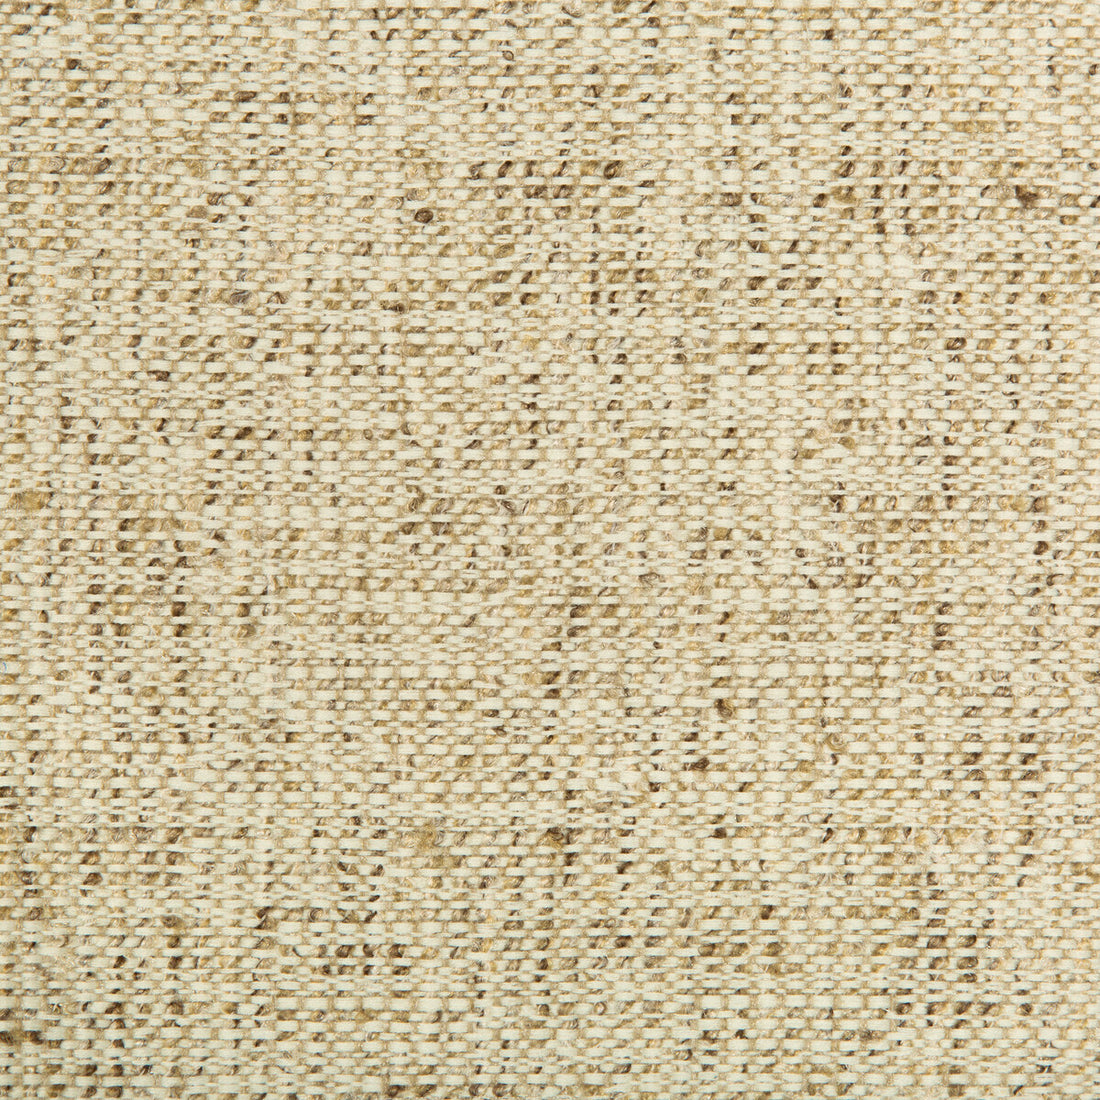 Kravet Contract fabric in 34635-616 color - pattern 34635.616.0 - by Kravet Contract in the Crypton Incase collection